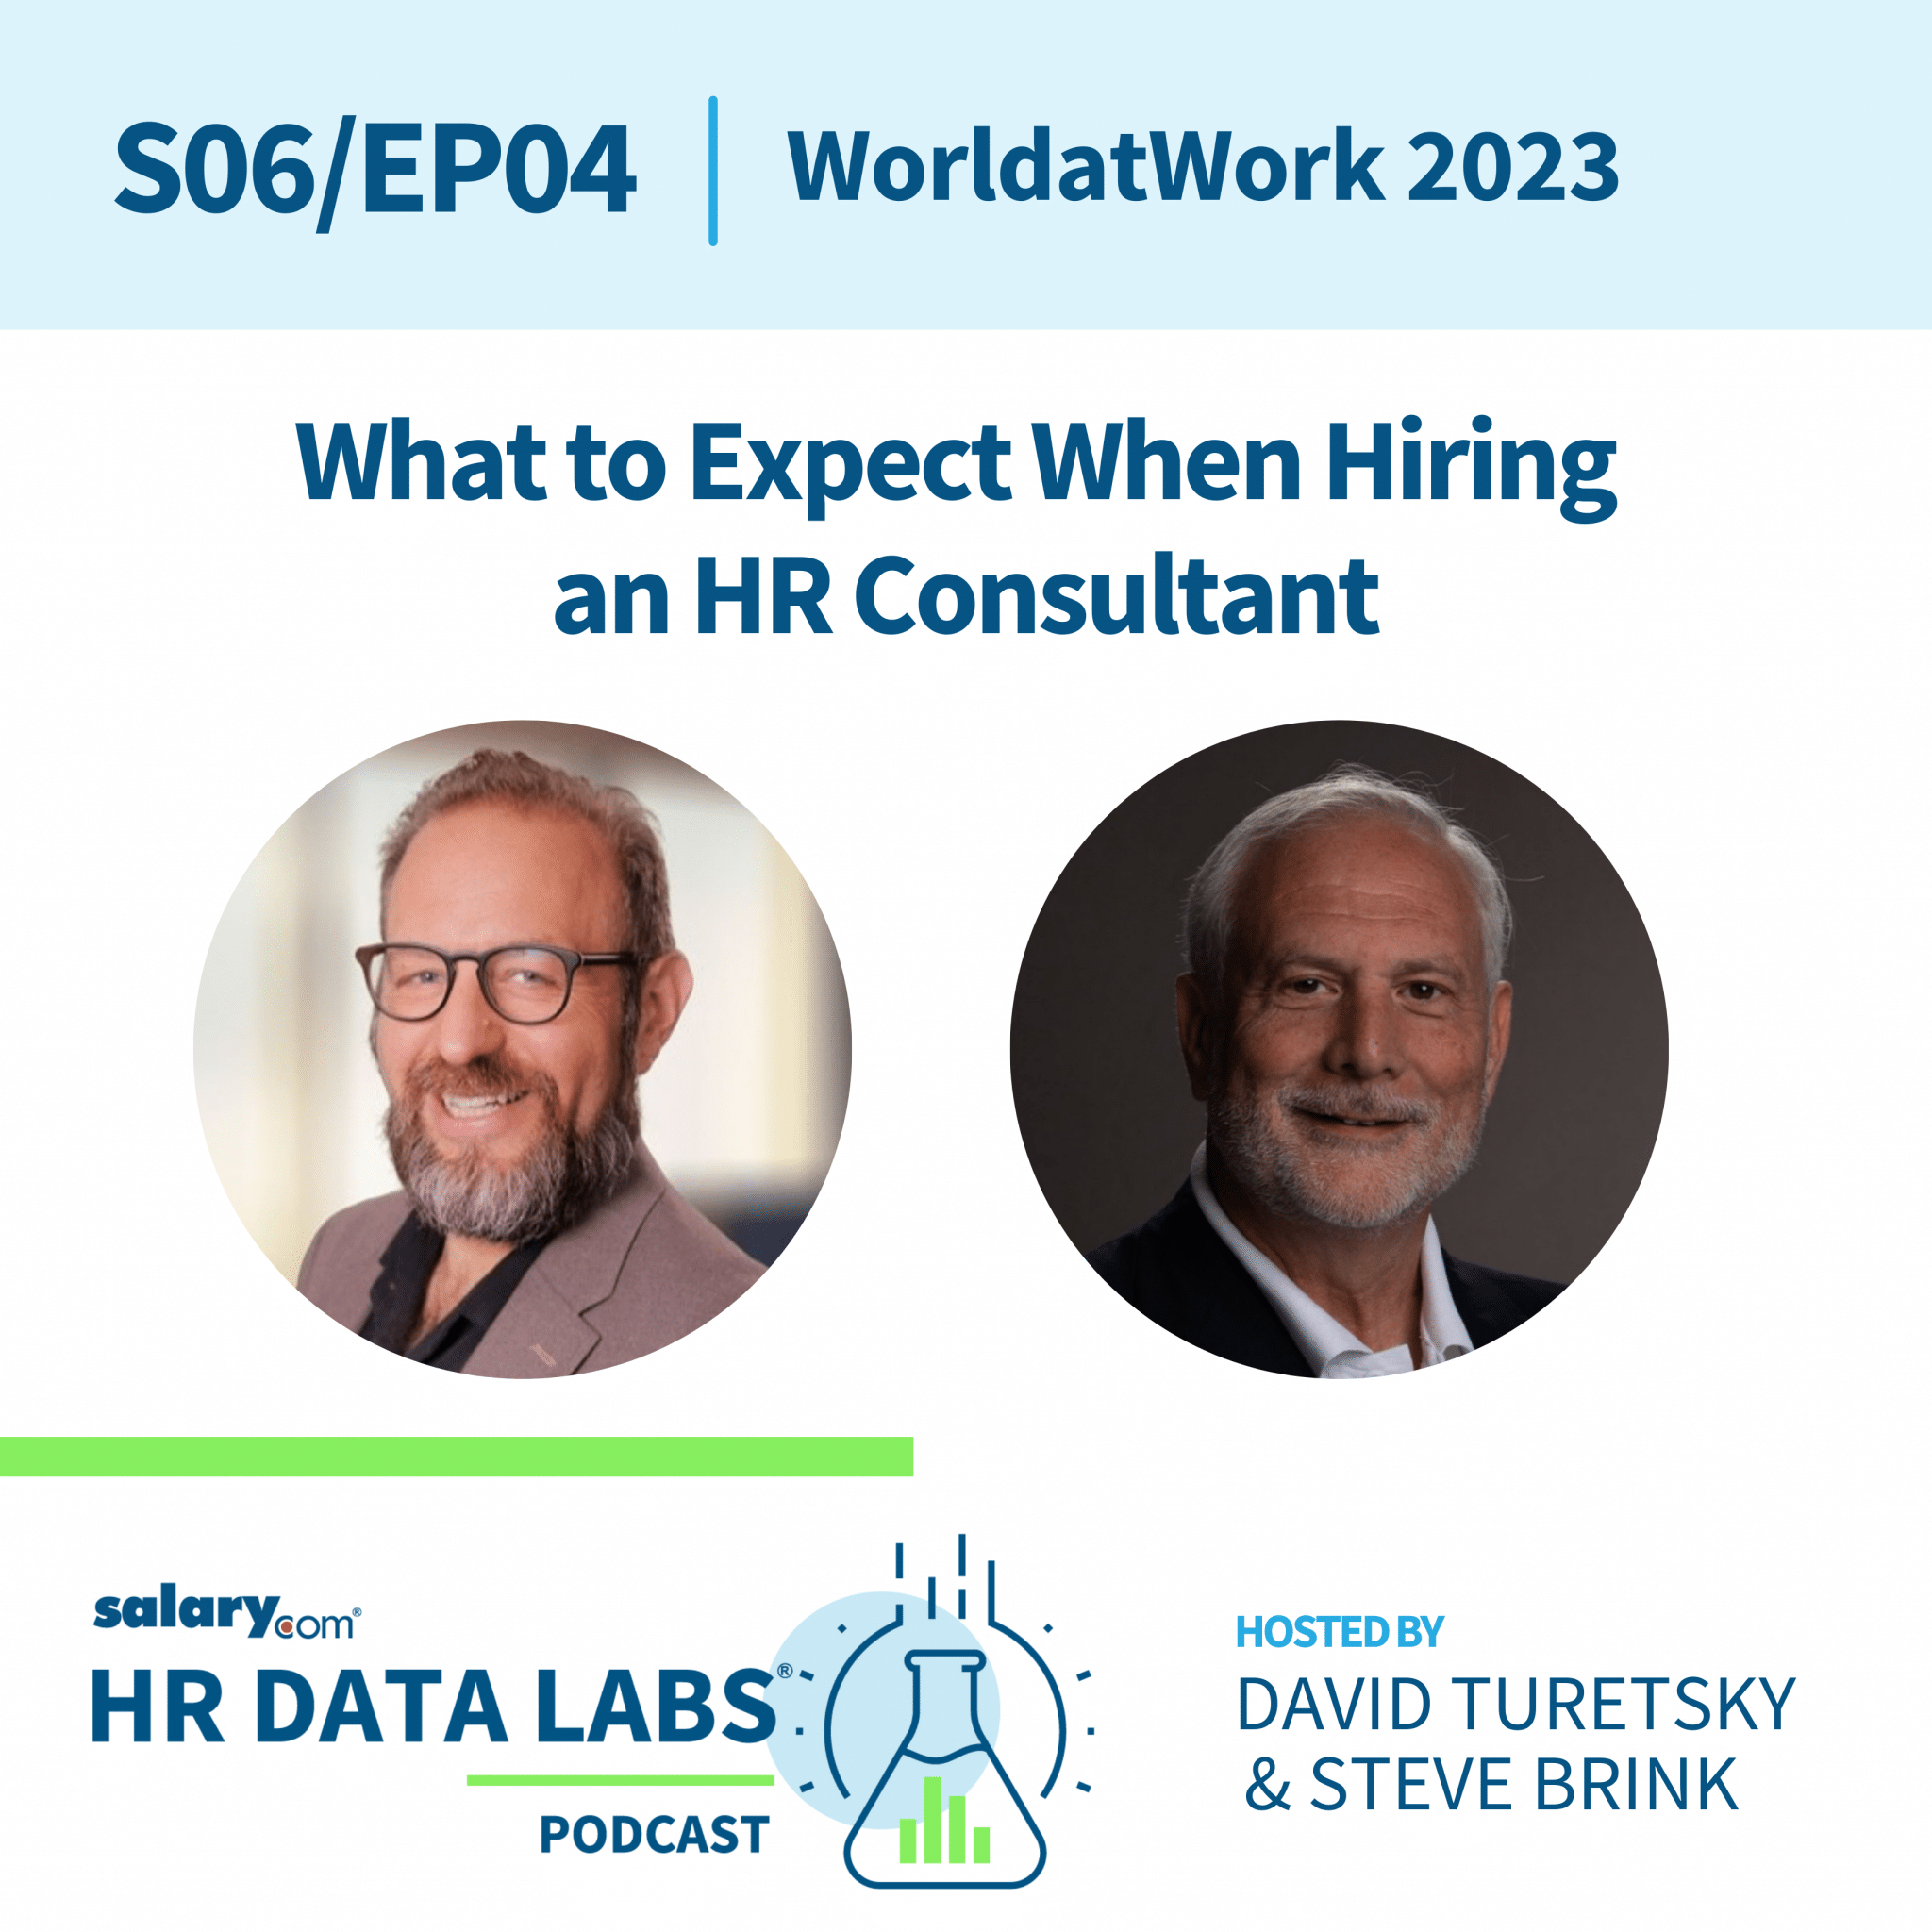 What to Expect When Hiring an HR Consultant